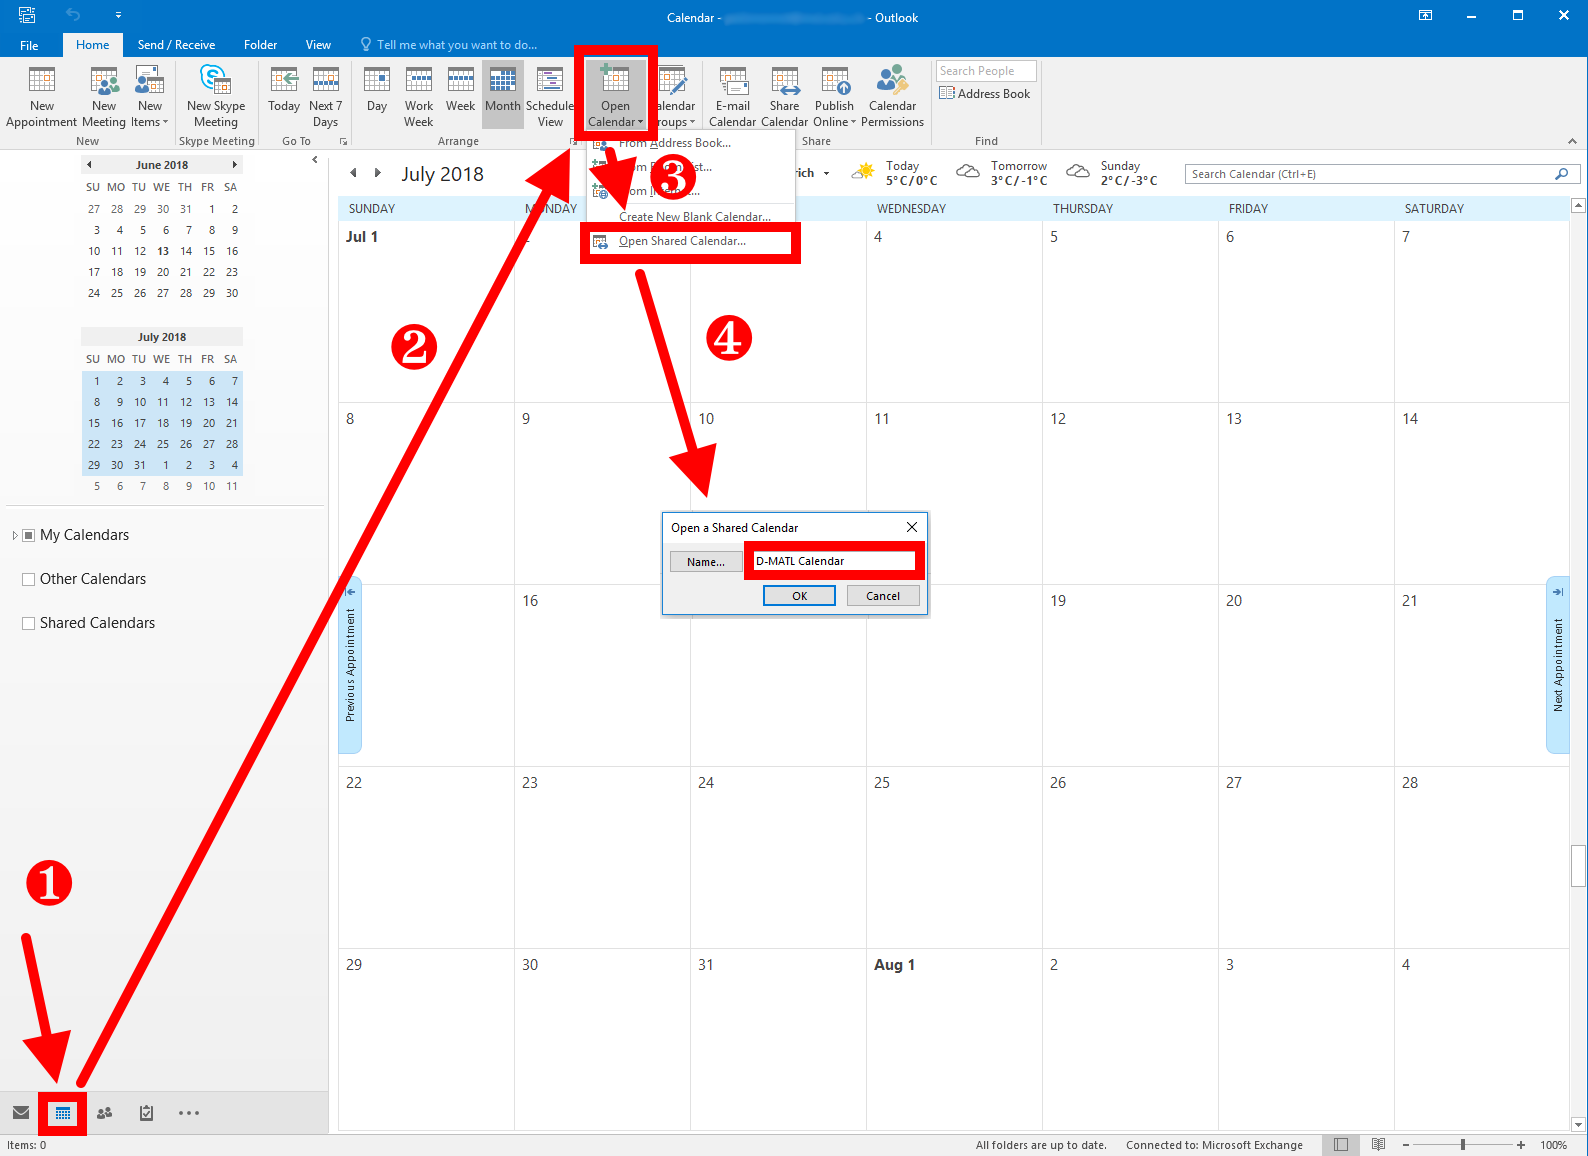 Enlarged view: Add shared calendar to Outlook 2016 Windows